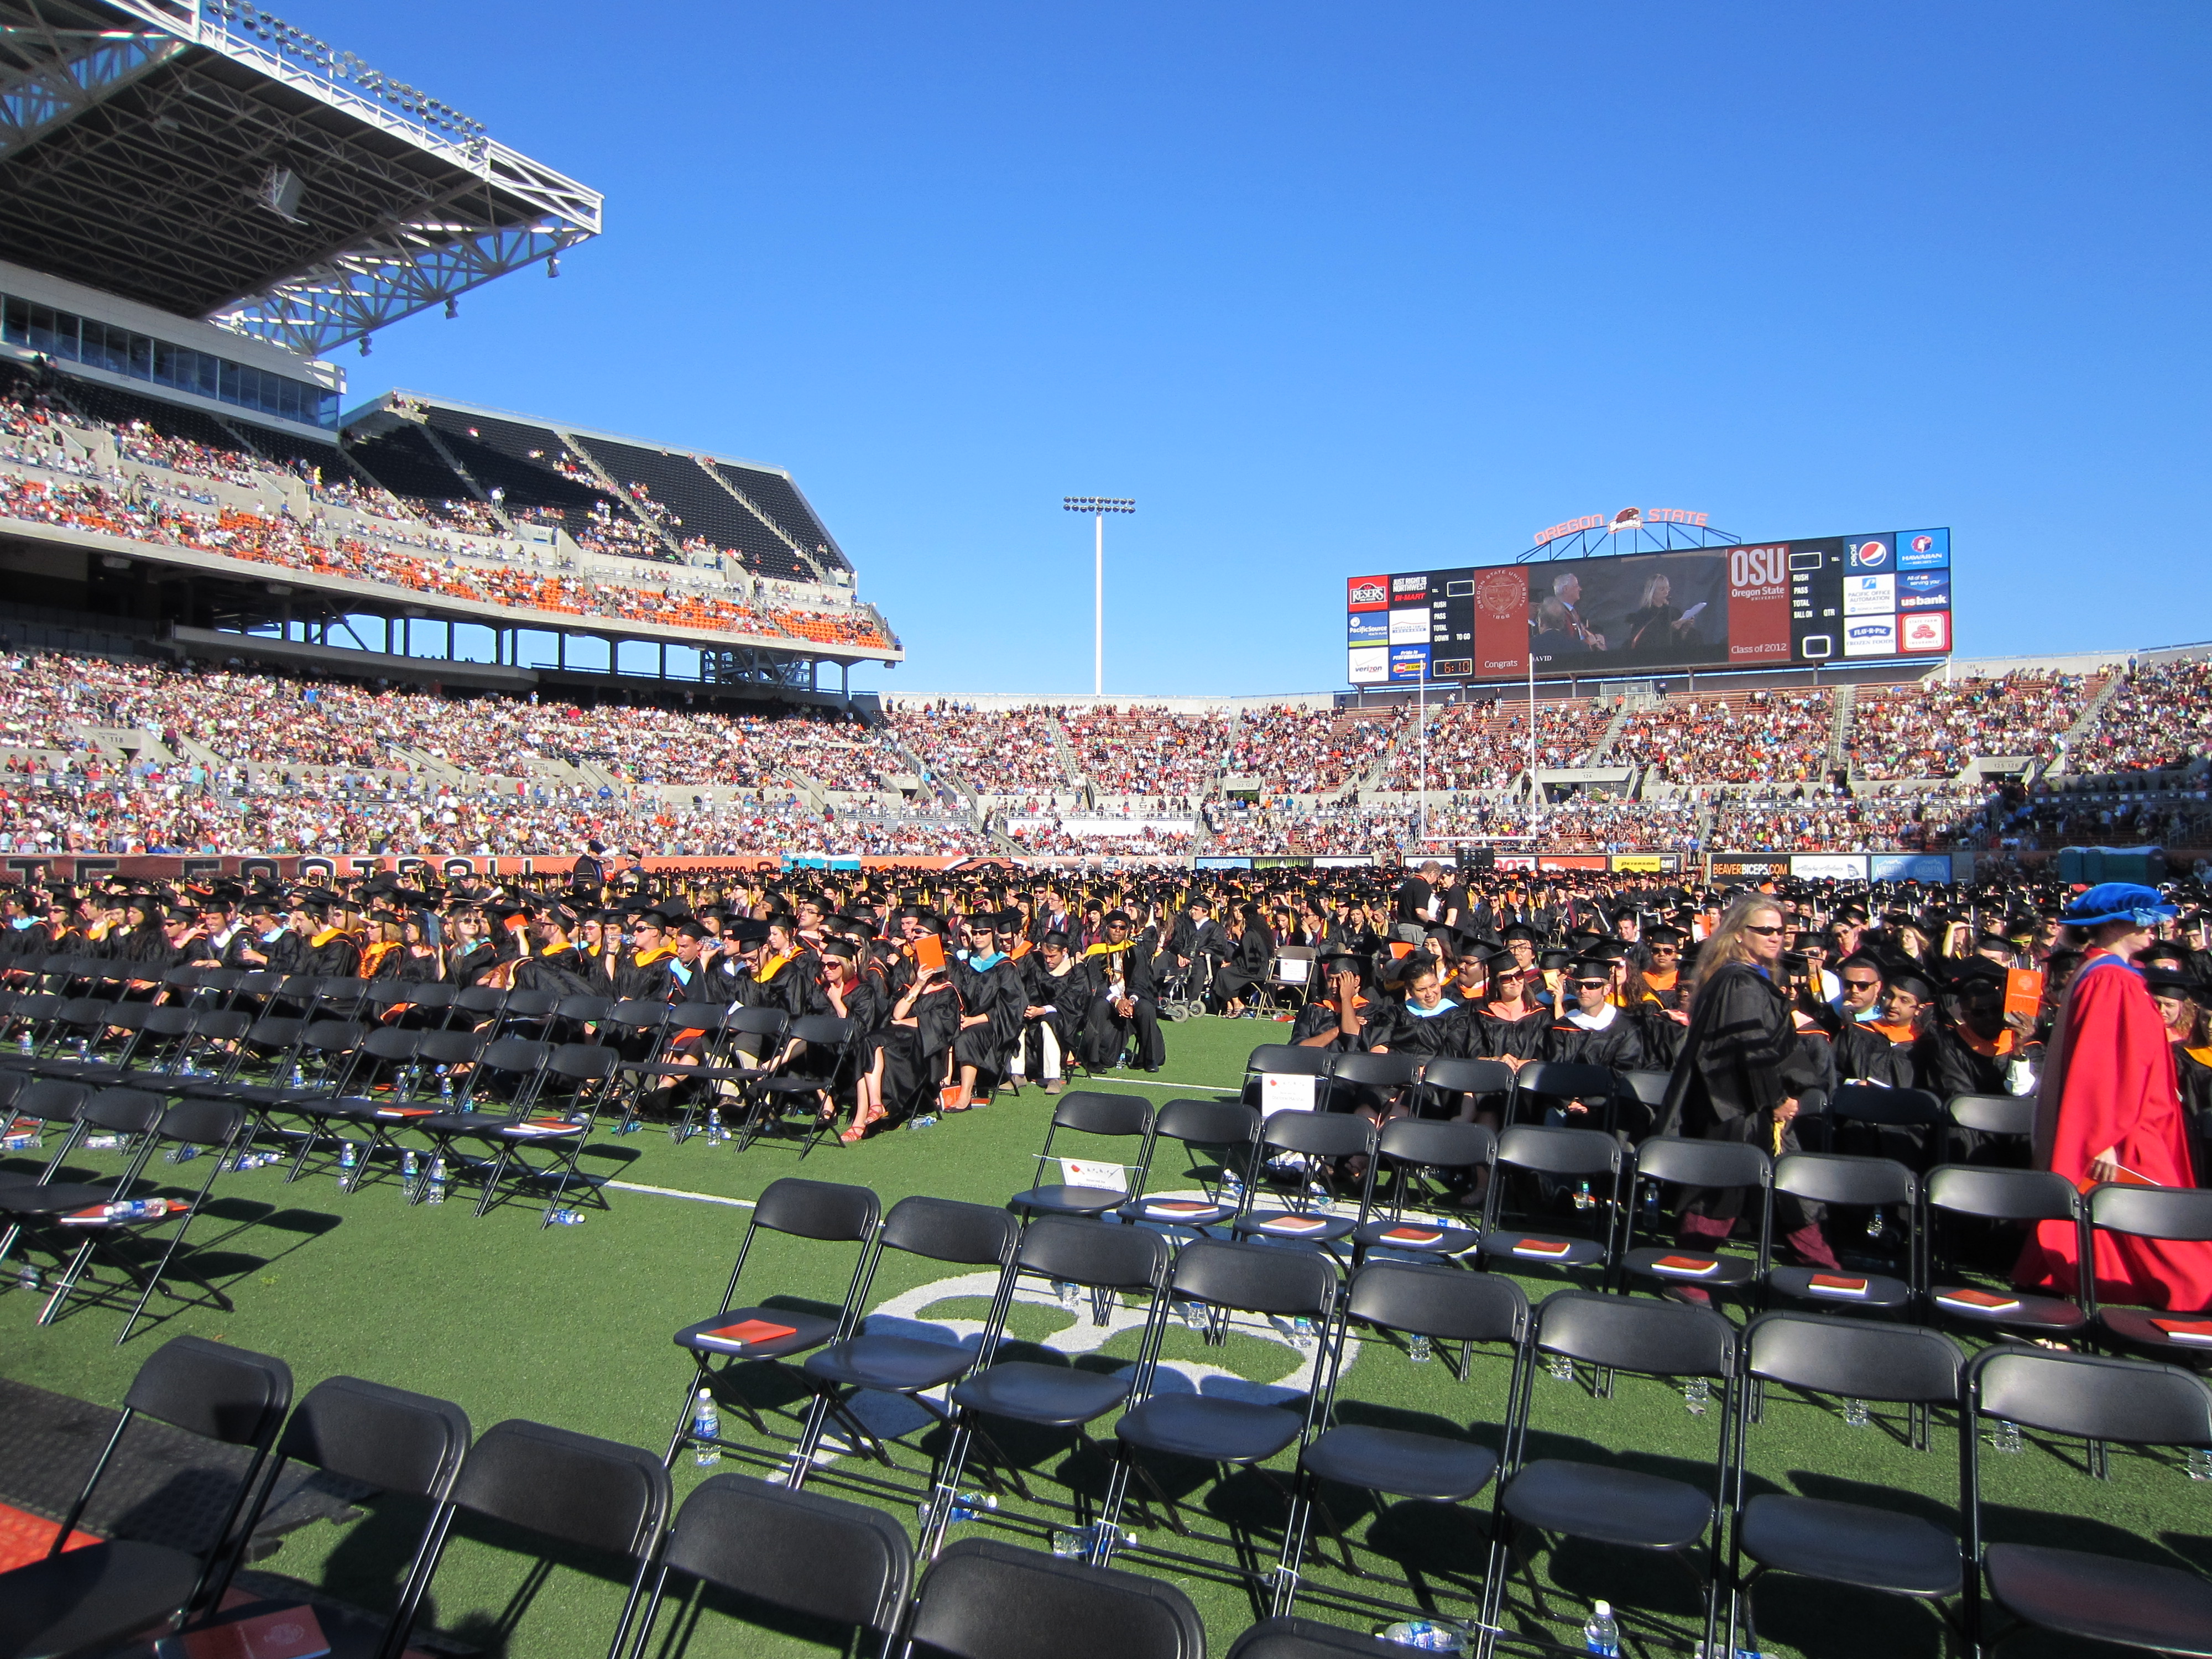 OSU 2012 Commencement Not Your Average Engineer